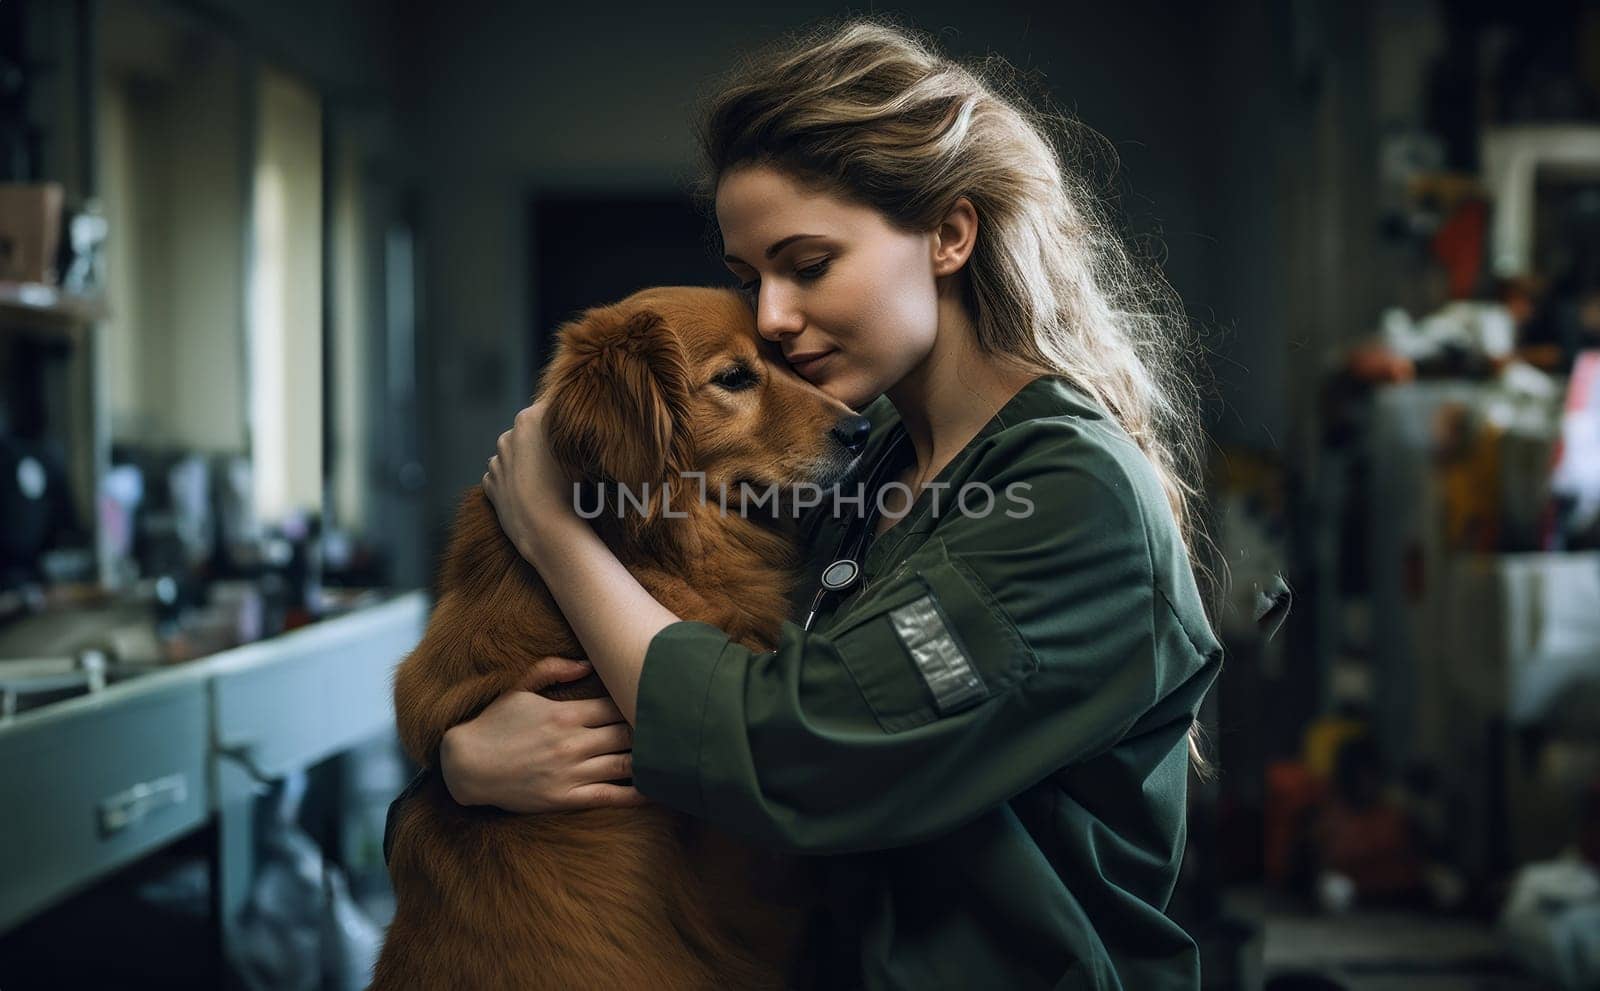 A veterinarian tenderly embraces a dog in a veterinary clinic, demonstrating compassion and care.Generated image.